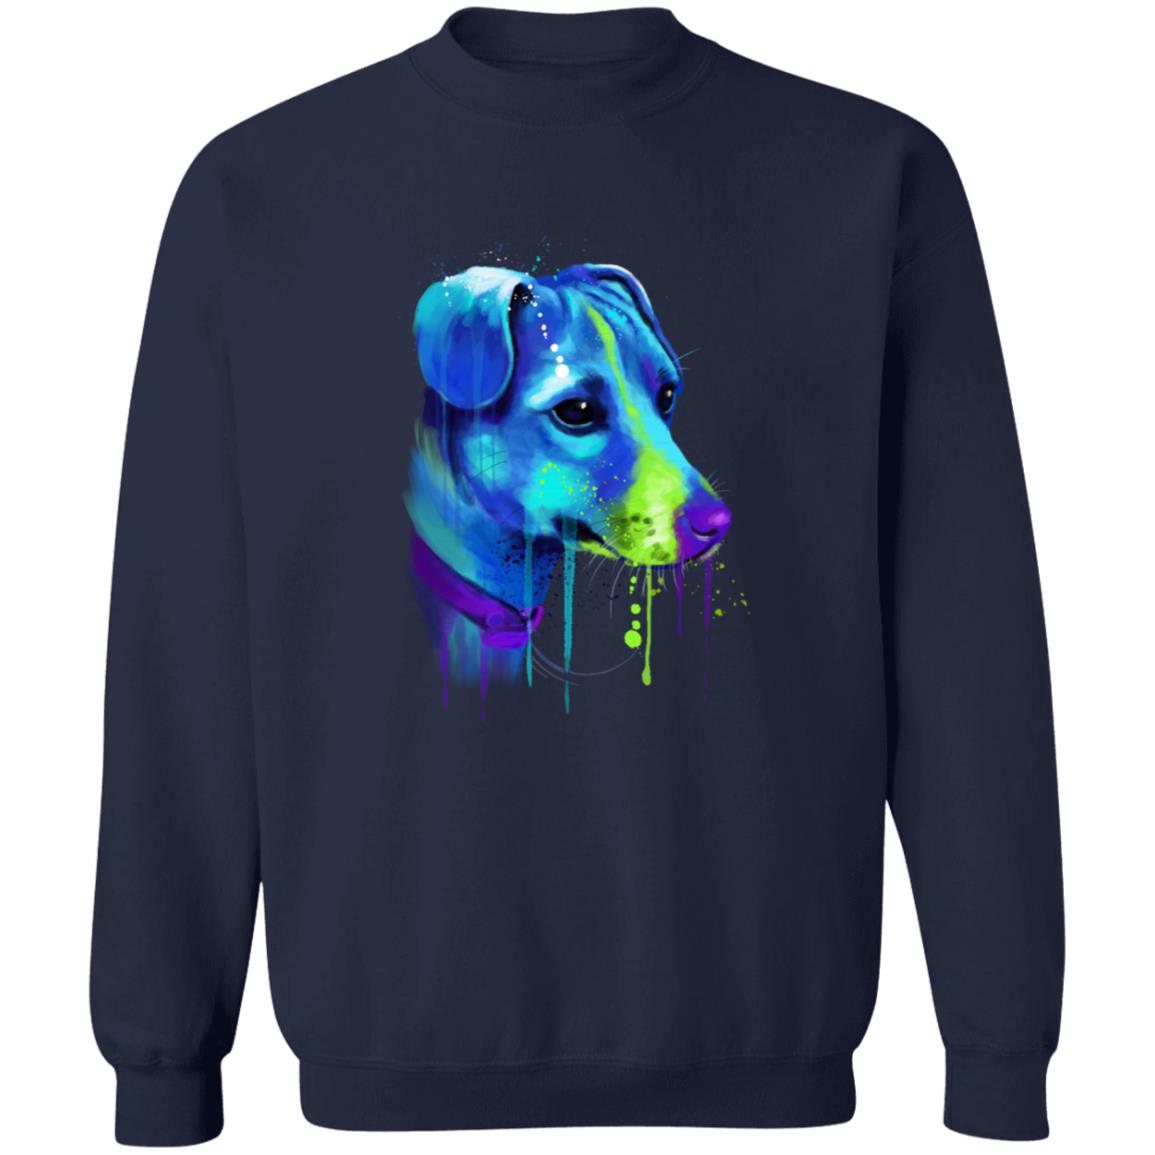 Abstract Jack Russell dog Unisex Crewneck Sweatshirt with expressive splashes-Family-Gift-Planet